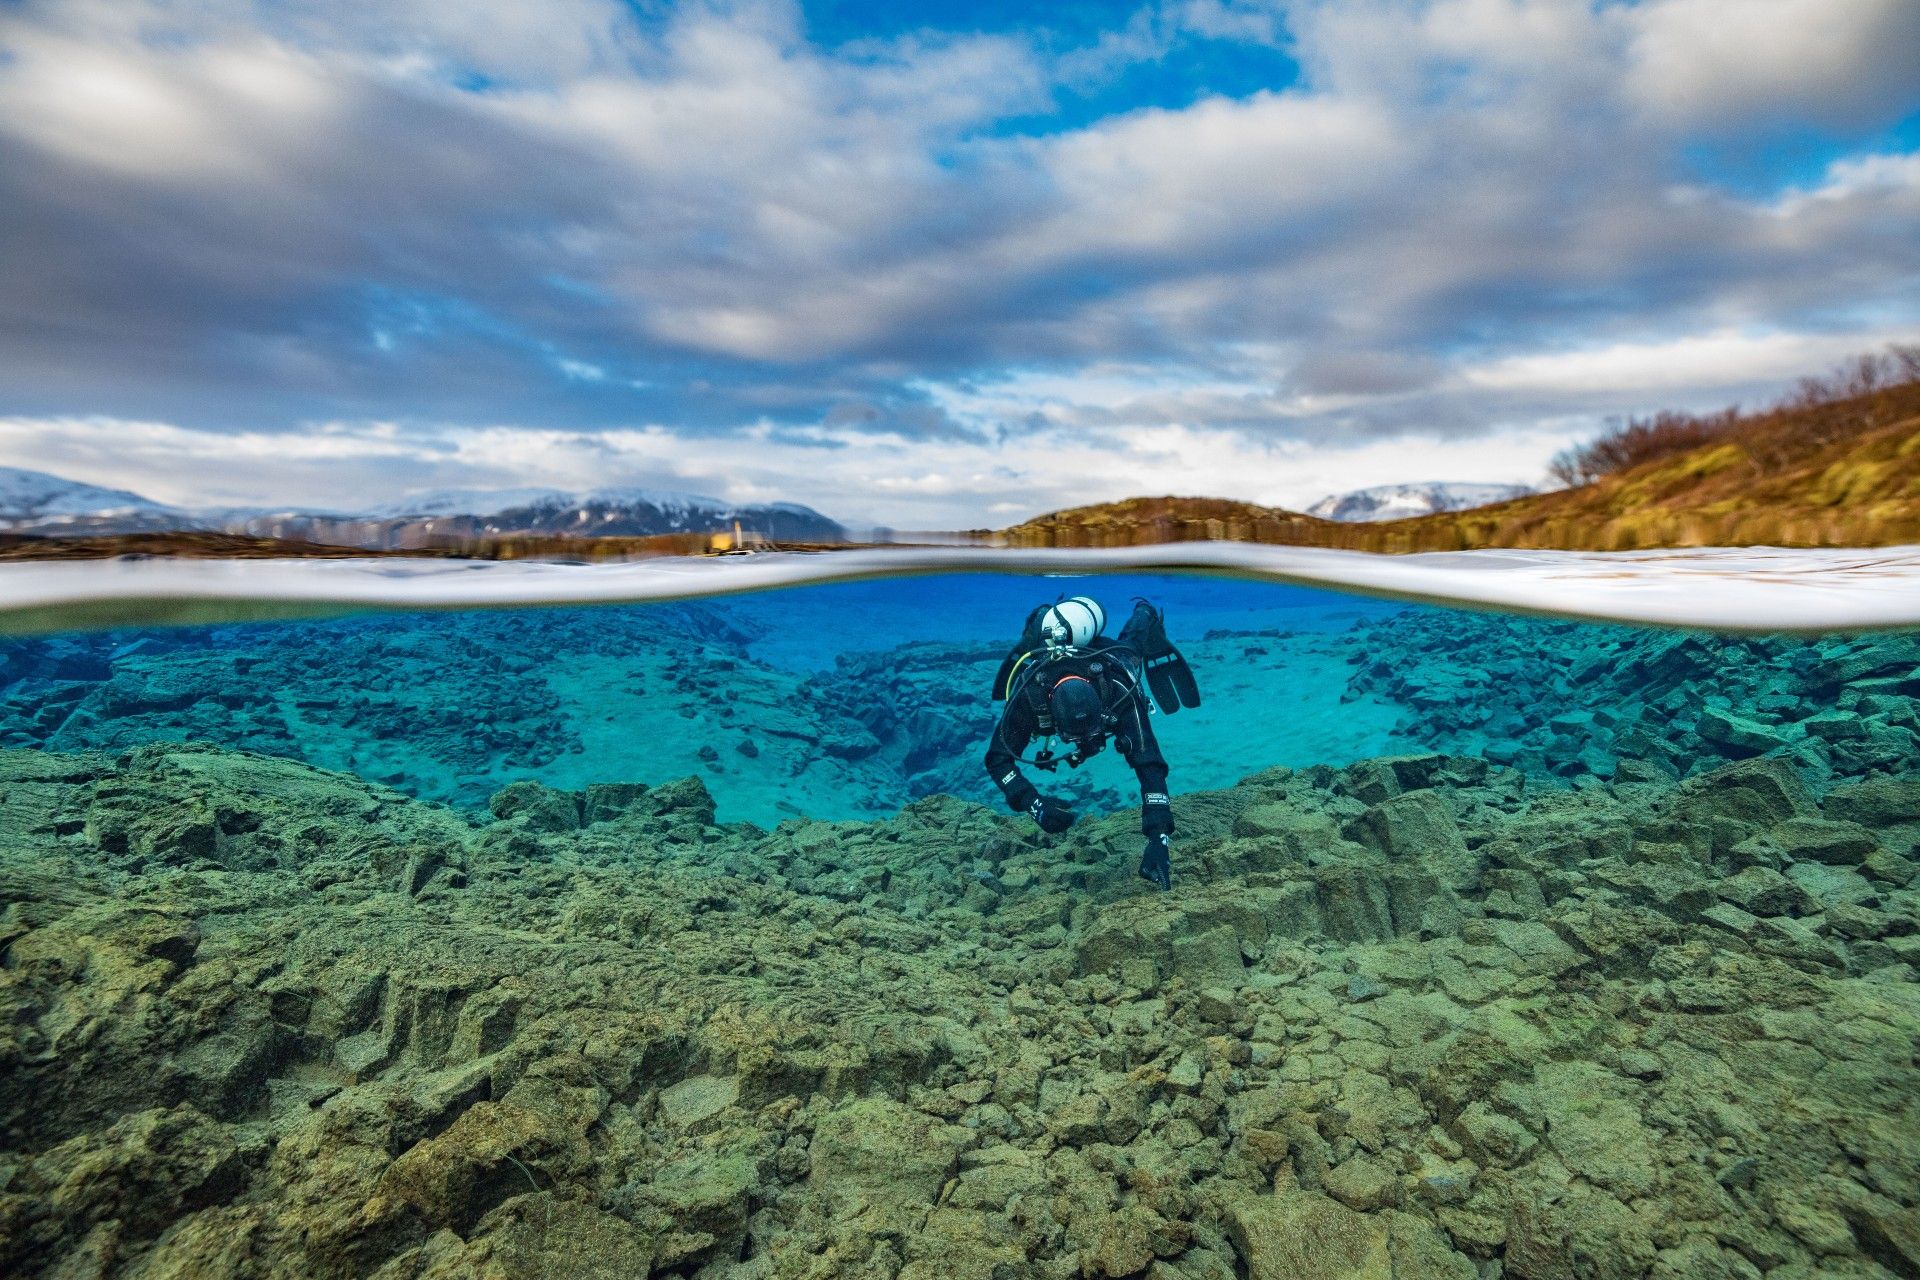 Padi Dry Suit Course And Silfra Diving Tour In 2 Days Diveis Iceland 